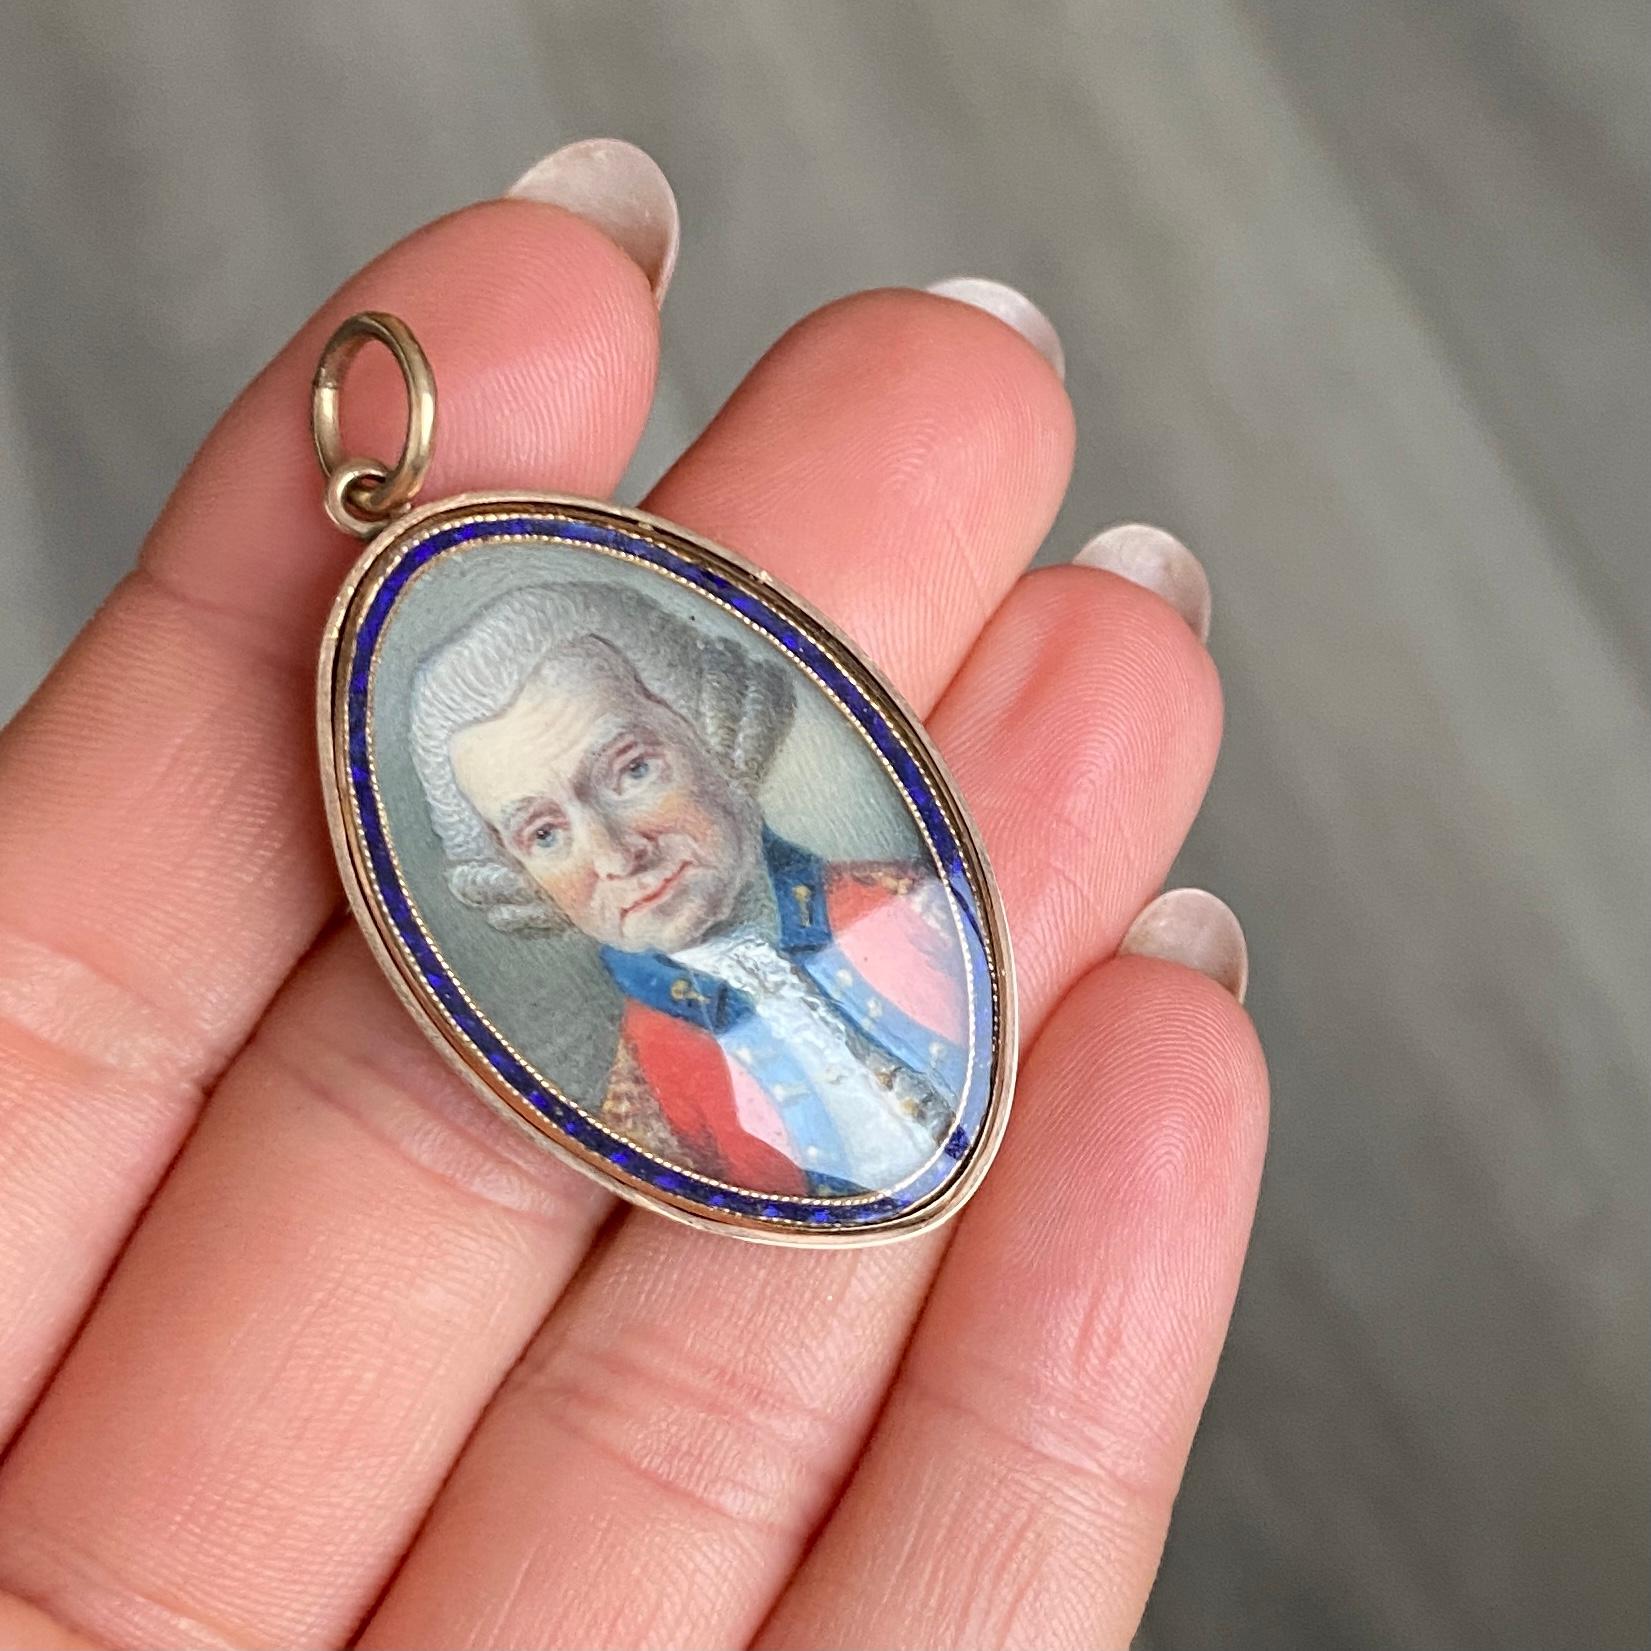 This brooch has navy blue enamel surrounding an exquisite portrait of an officer. The back of the pendant is smooth gold. 

Dimensions: 35x24mm

Weight: 10.2g